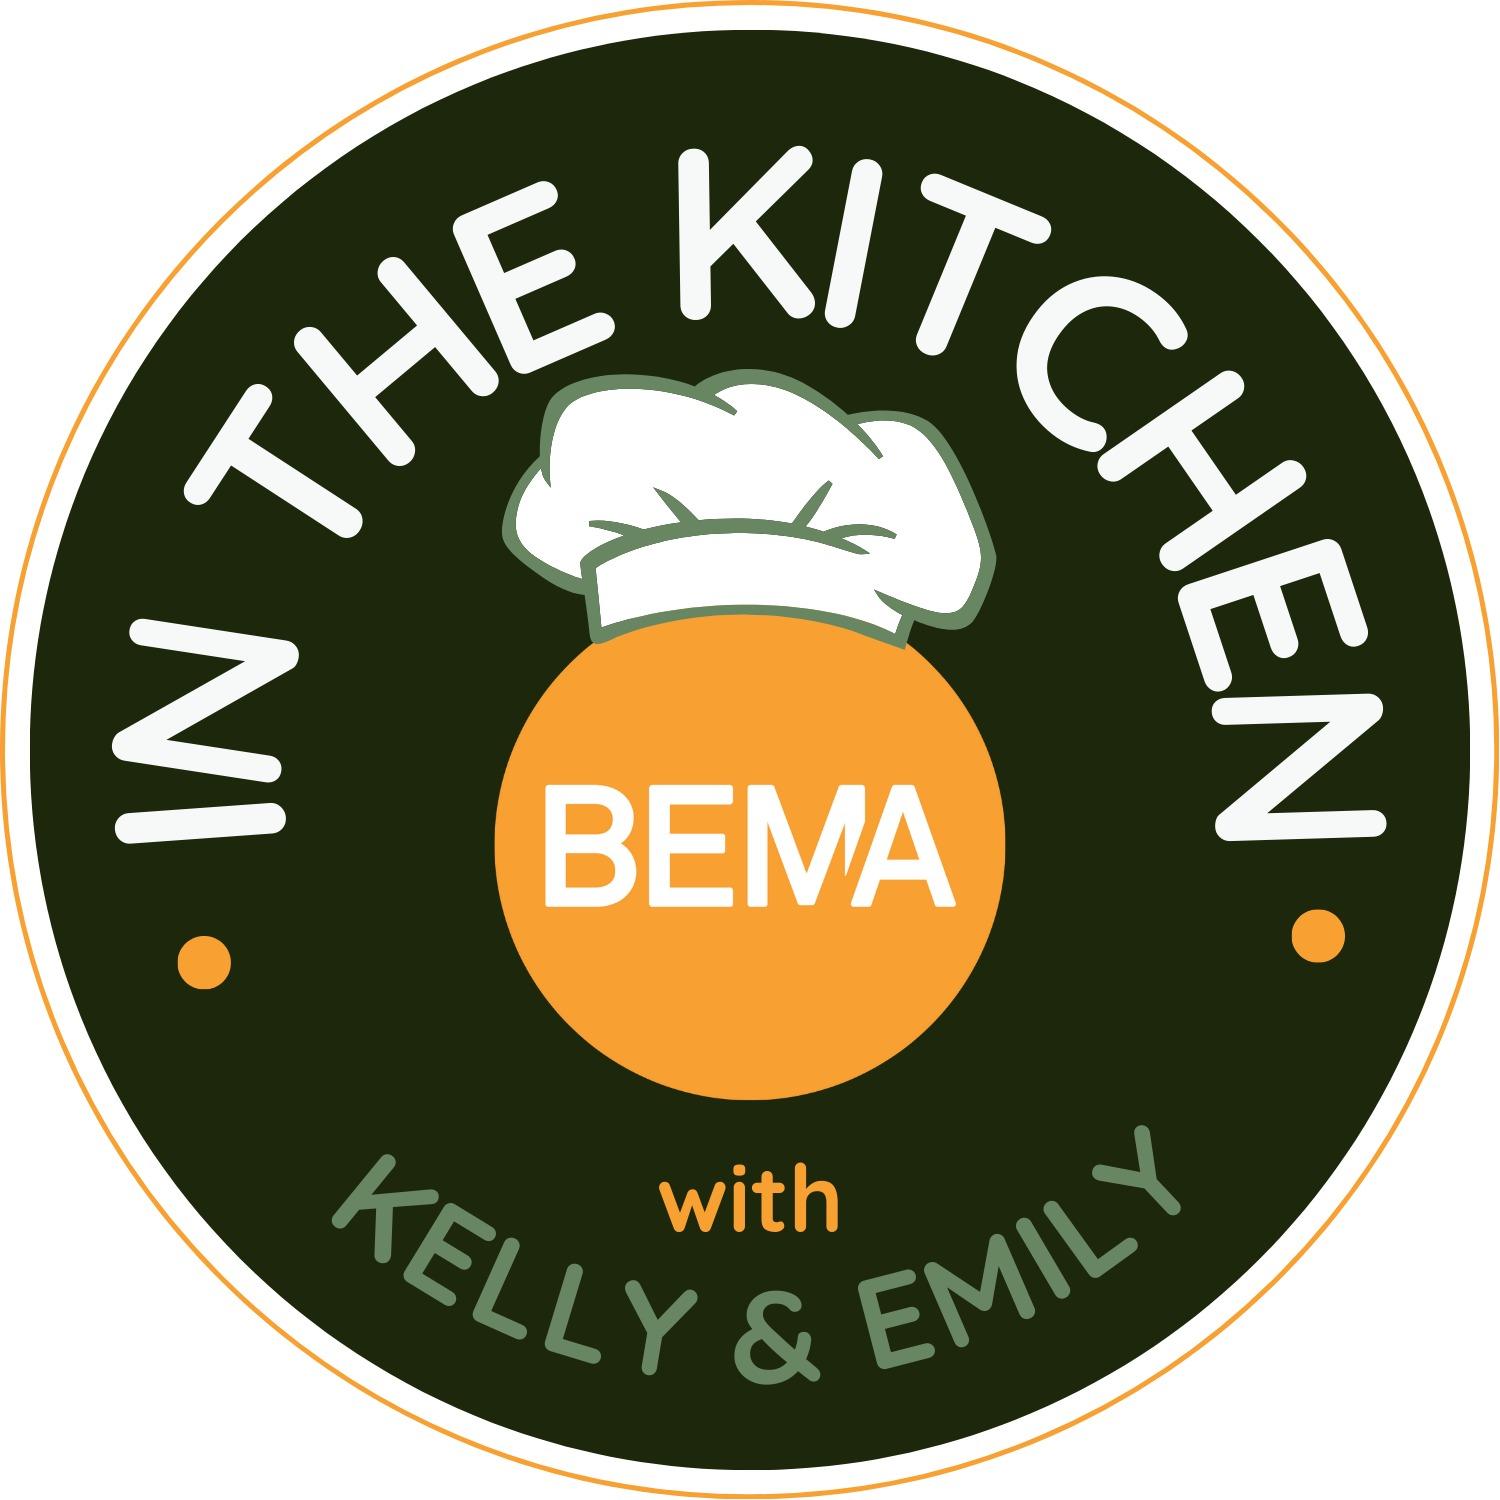 In The Kitchen with Kelly & Emily